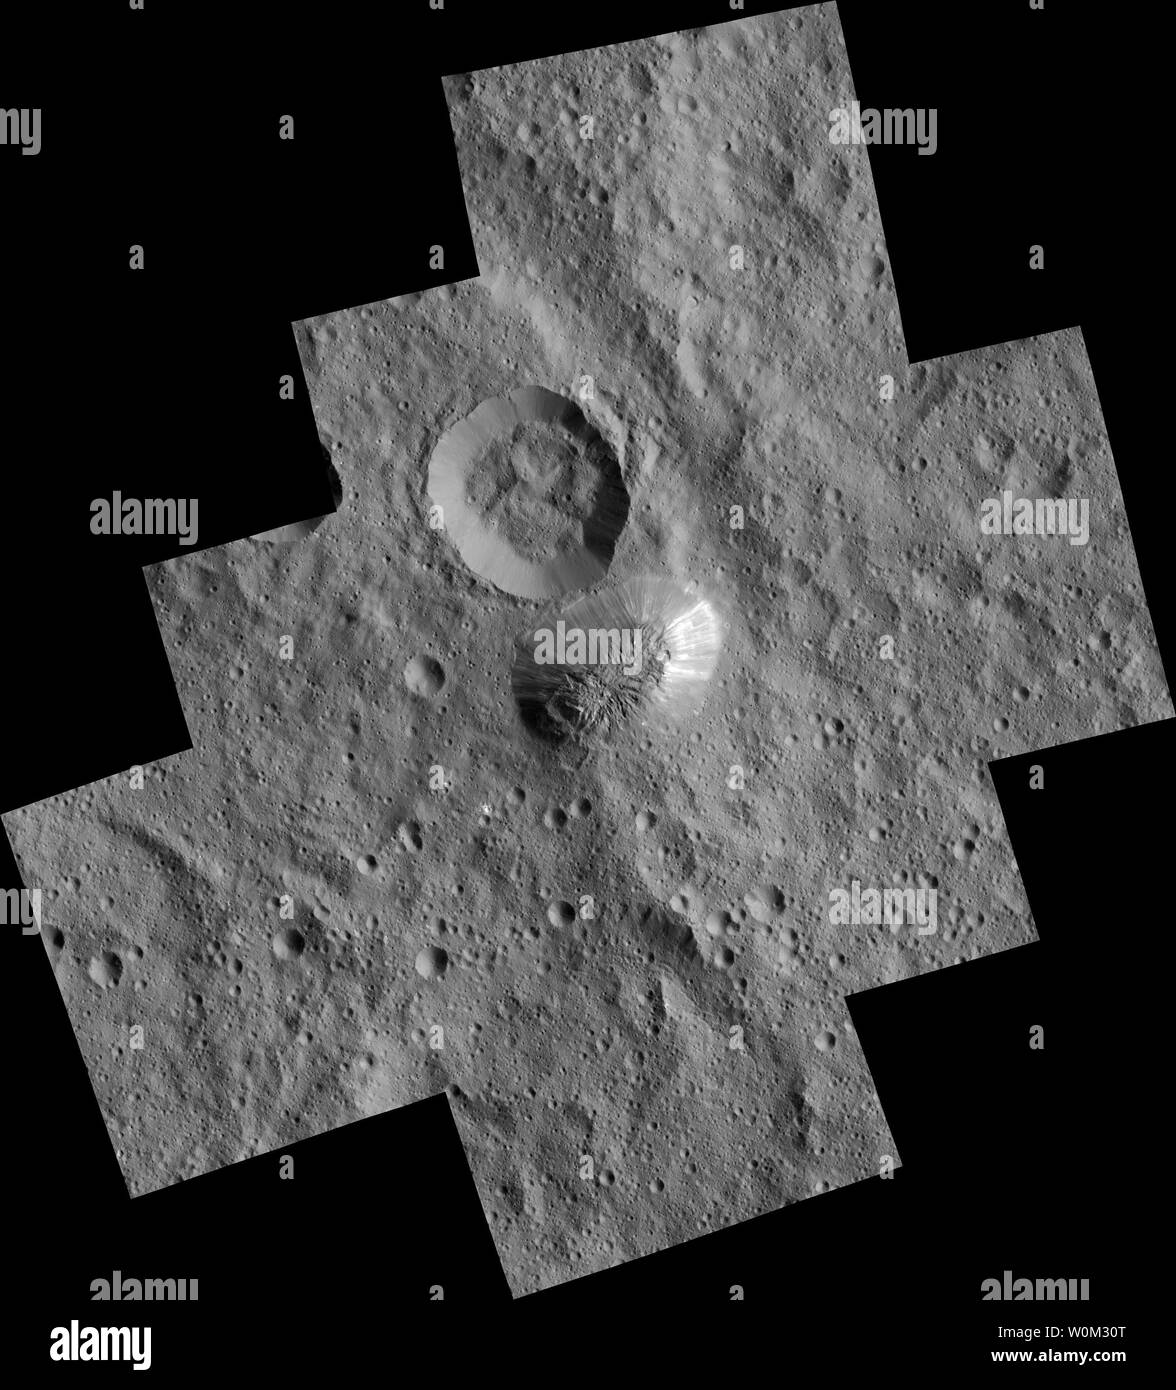 The mysterious mountain Ahuna Mons is seen in this mosaic of images from NASA's Dawn spacecraft. Dawn took these images from its low-altitude mapping orbit in December 2015. The resolution of the component images is 120 feet (35 meters) per pixel. On its steepest side, this mountain is about 3 miles (5 kilometers) high, with a diameter of about 12 miles (20 kilometers). On March 6, 2015, NASA's Dawn spacecraft slid gently into orbit around Ceres, the largest body in the asteroid belt between Mars and Jupiter. UPI Stock Photo